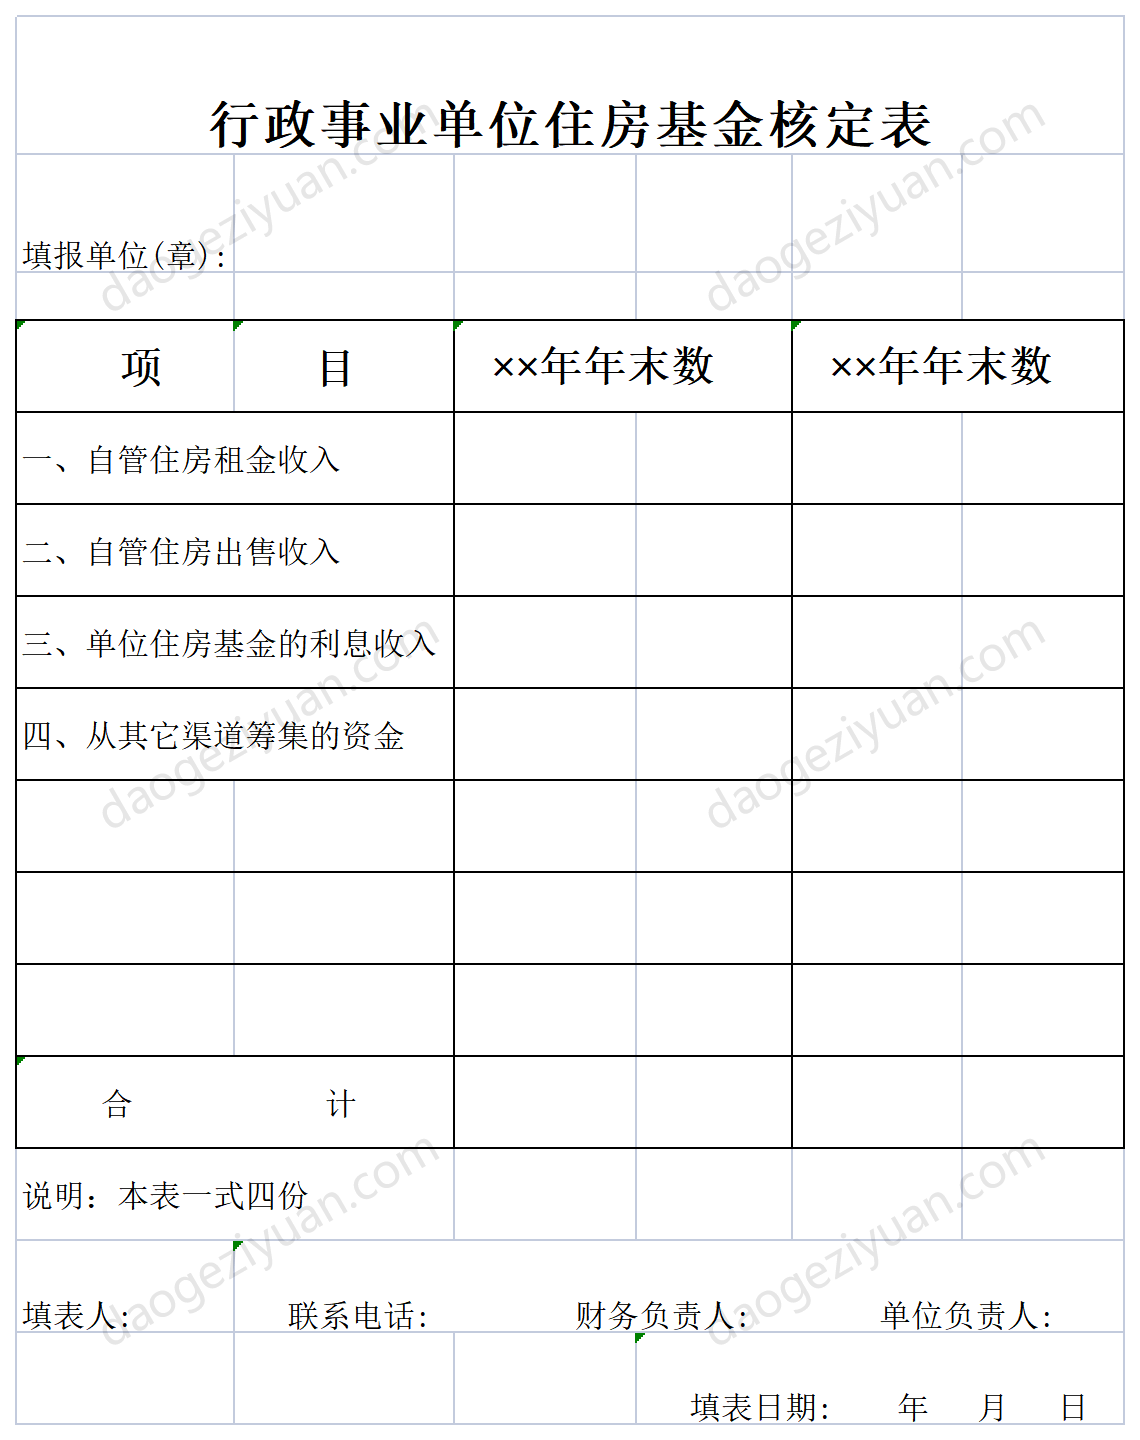 Housing Fund Approval Form for Administrative Institutions.xls